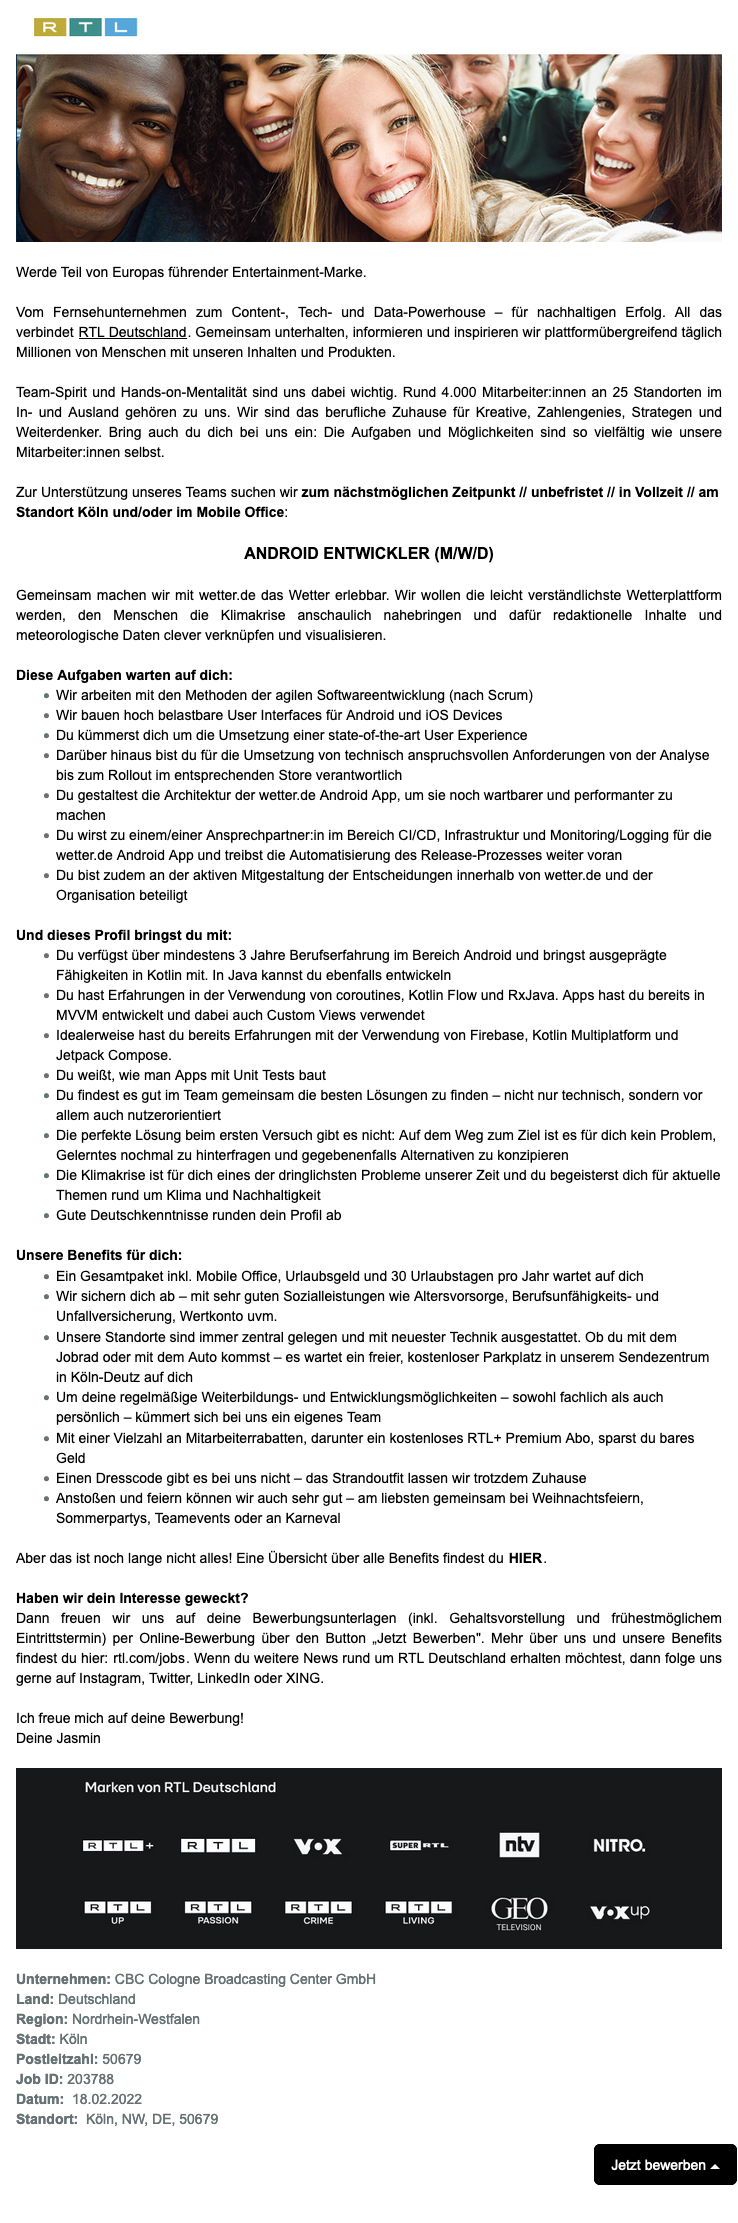 Android Entwickler (m/w/d) (CBC)